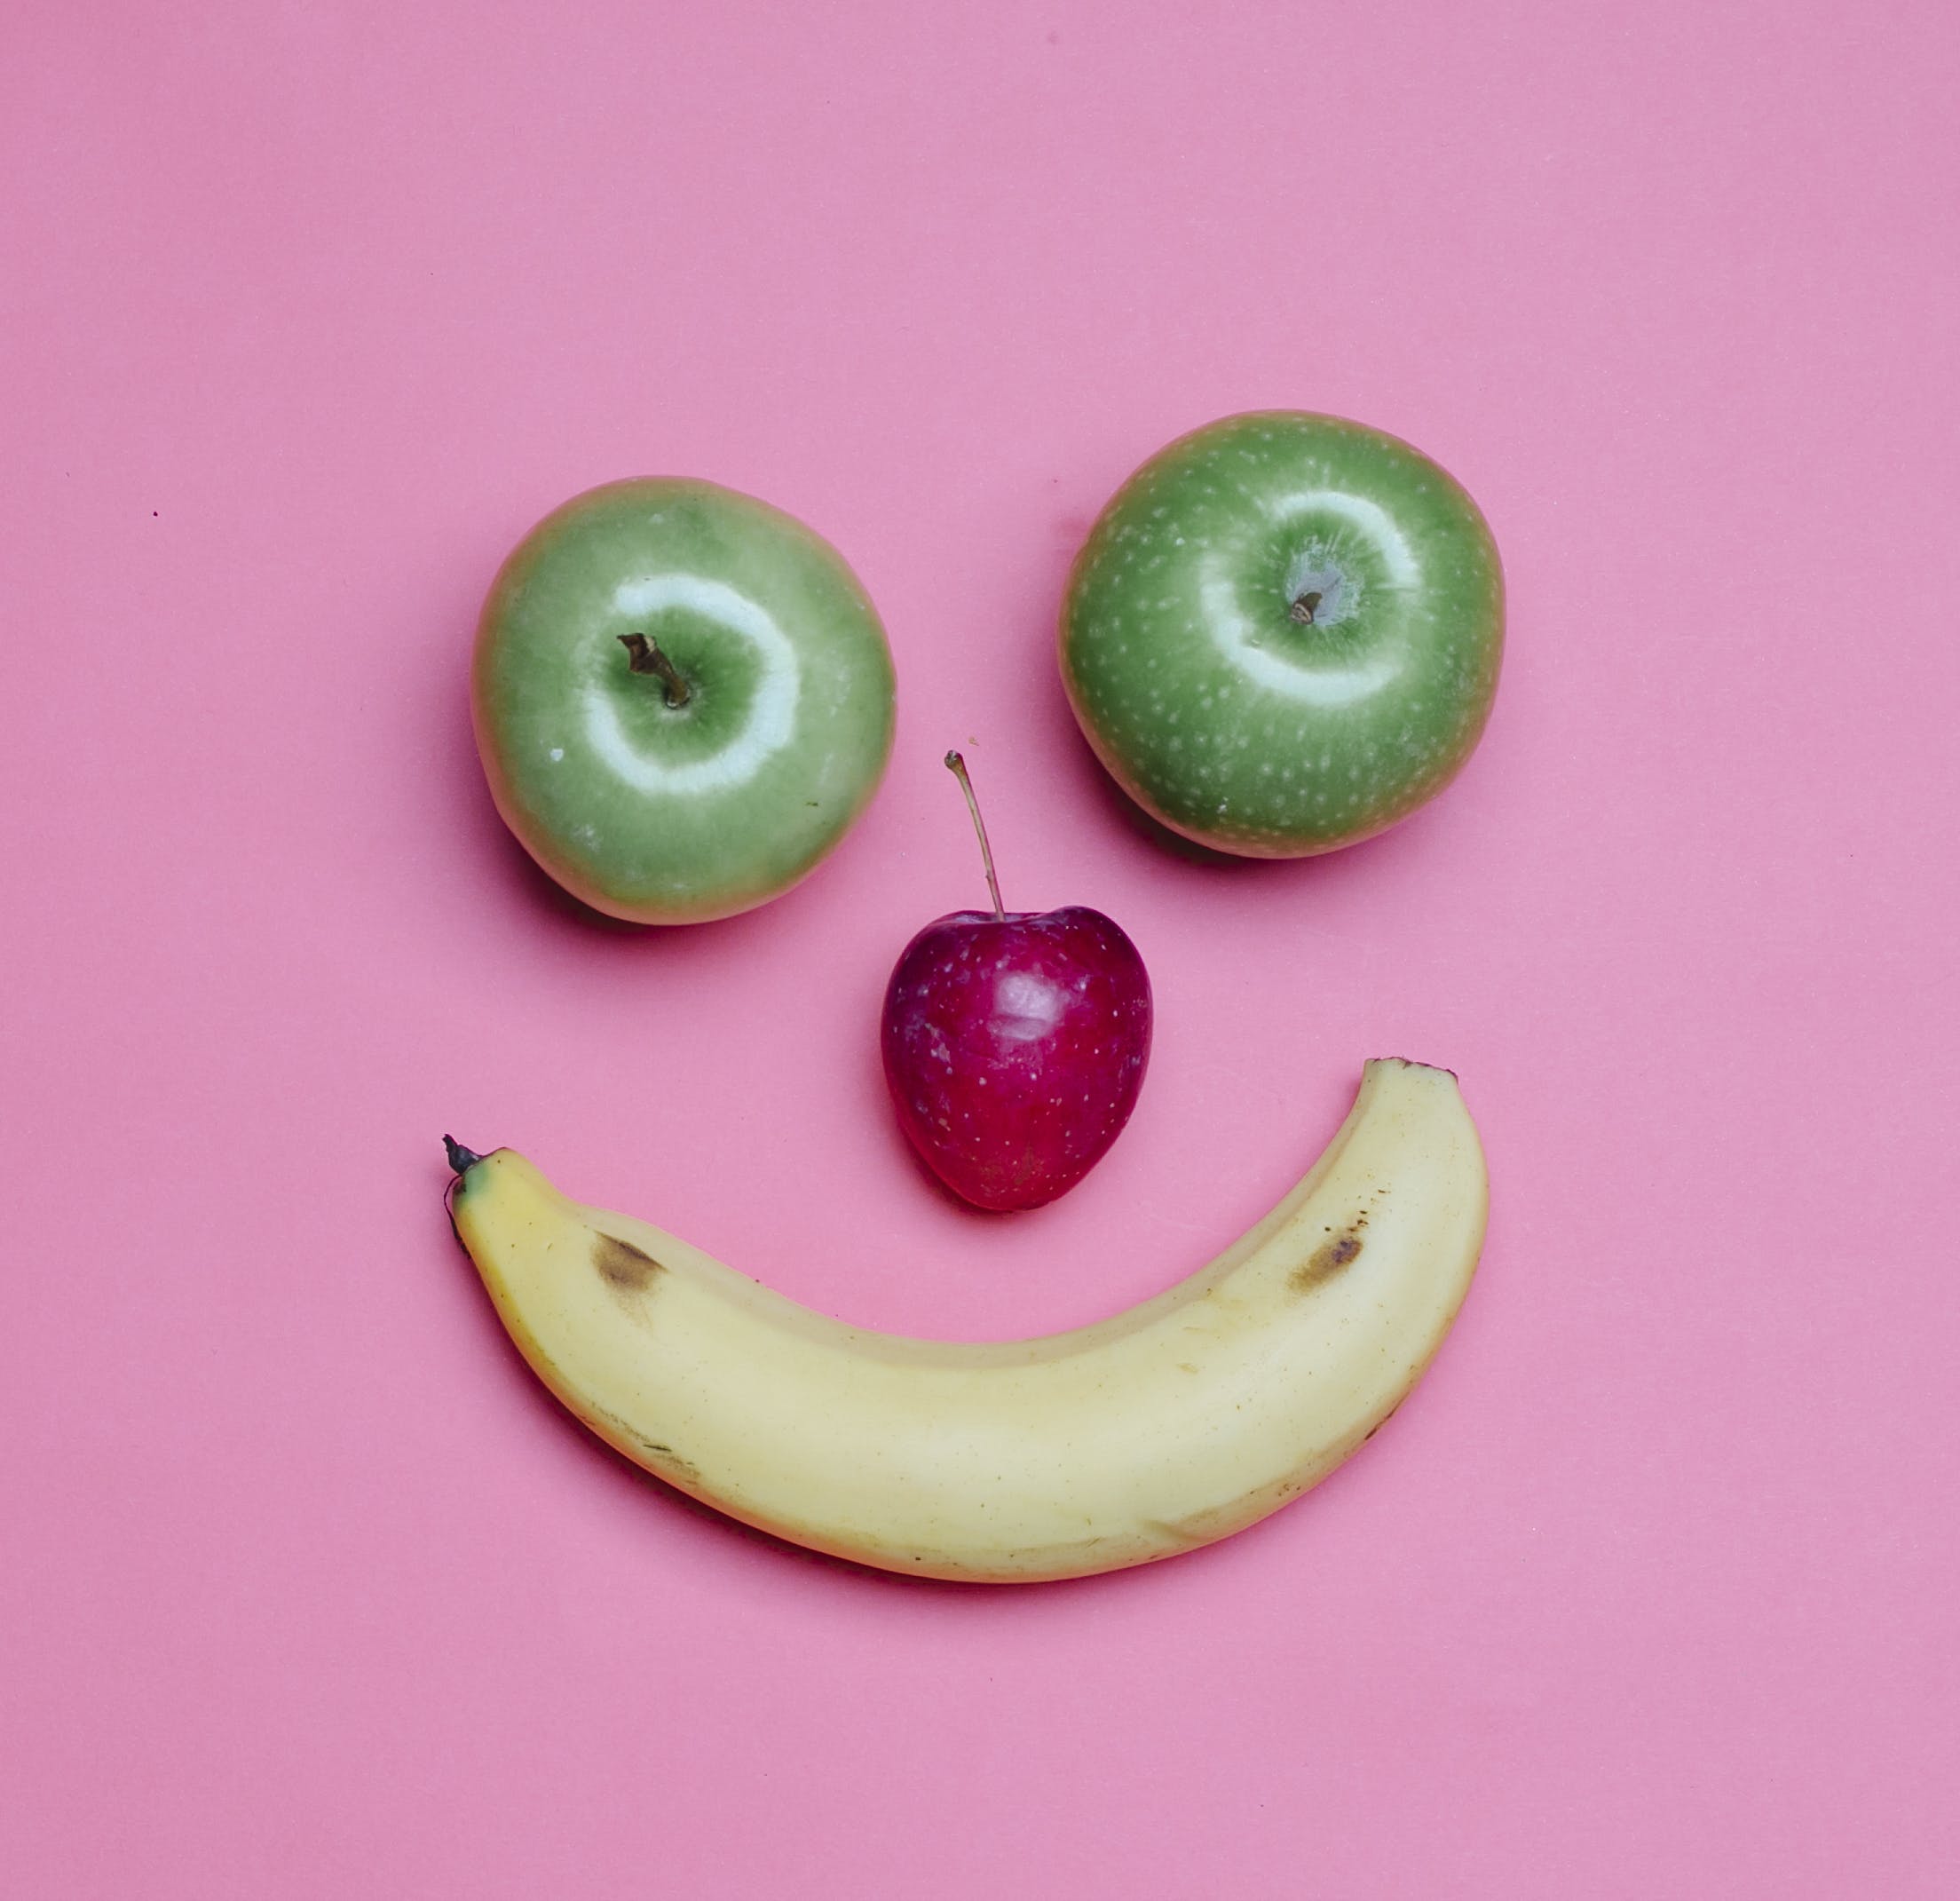 Top view of fresh ripe banana and green and red apples arranged as smile on pink background